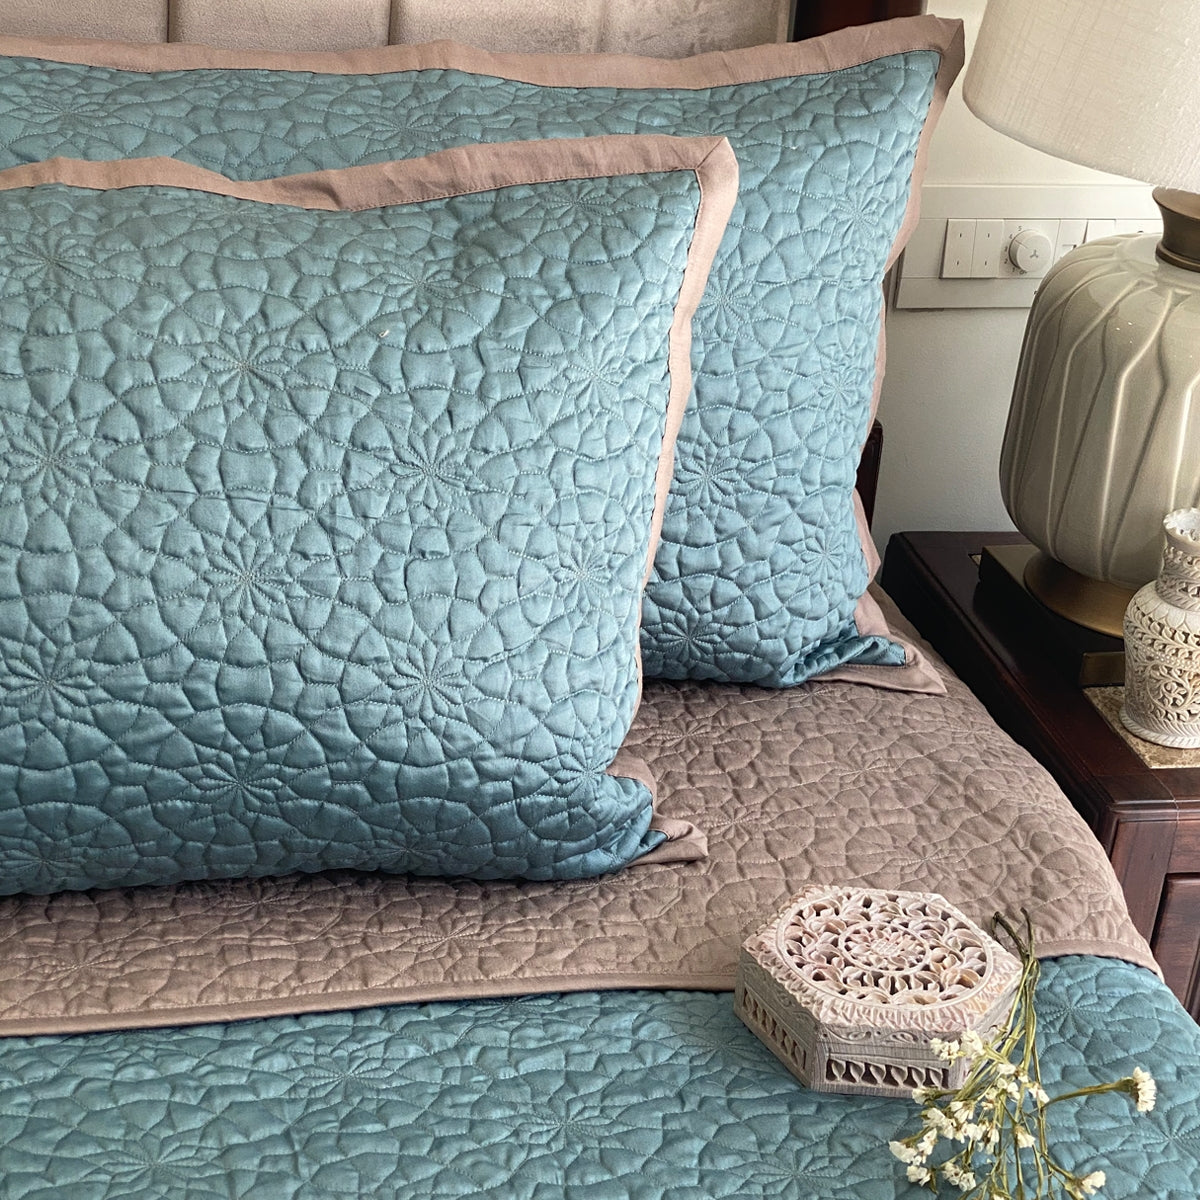 Teal and taupe bedspread